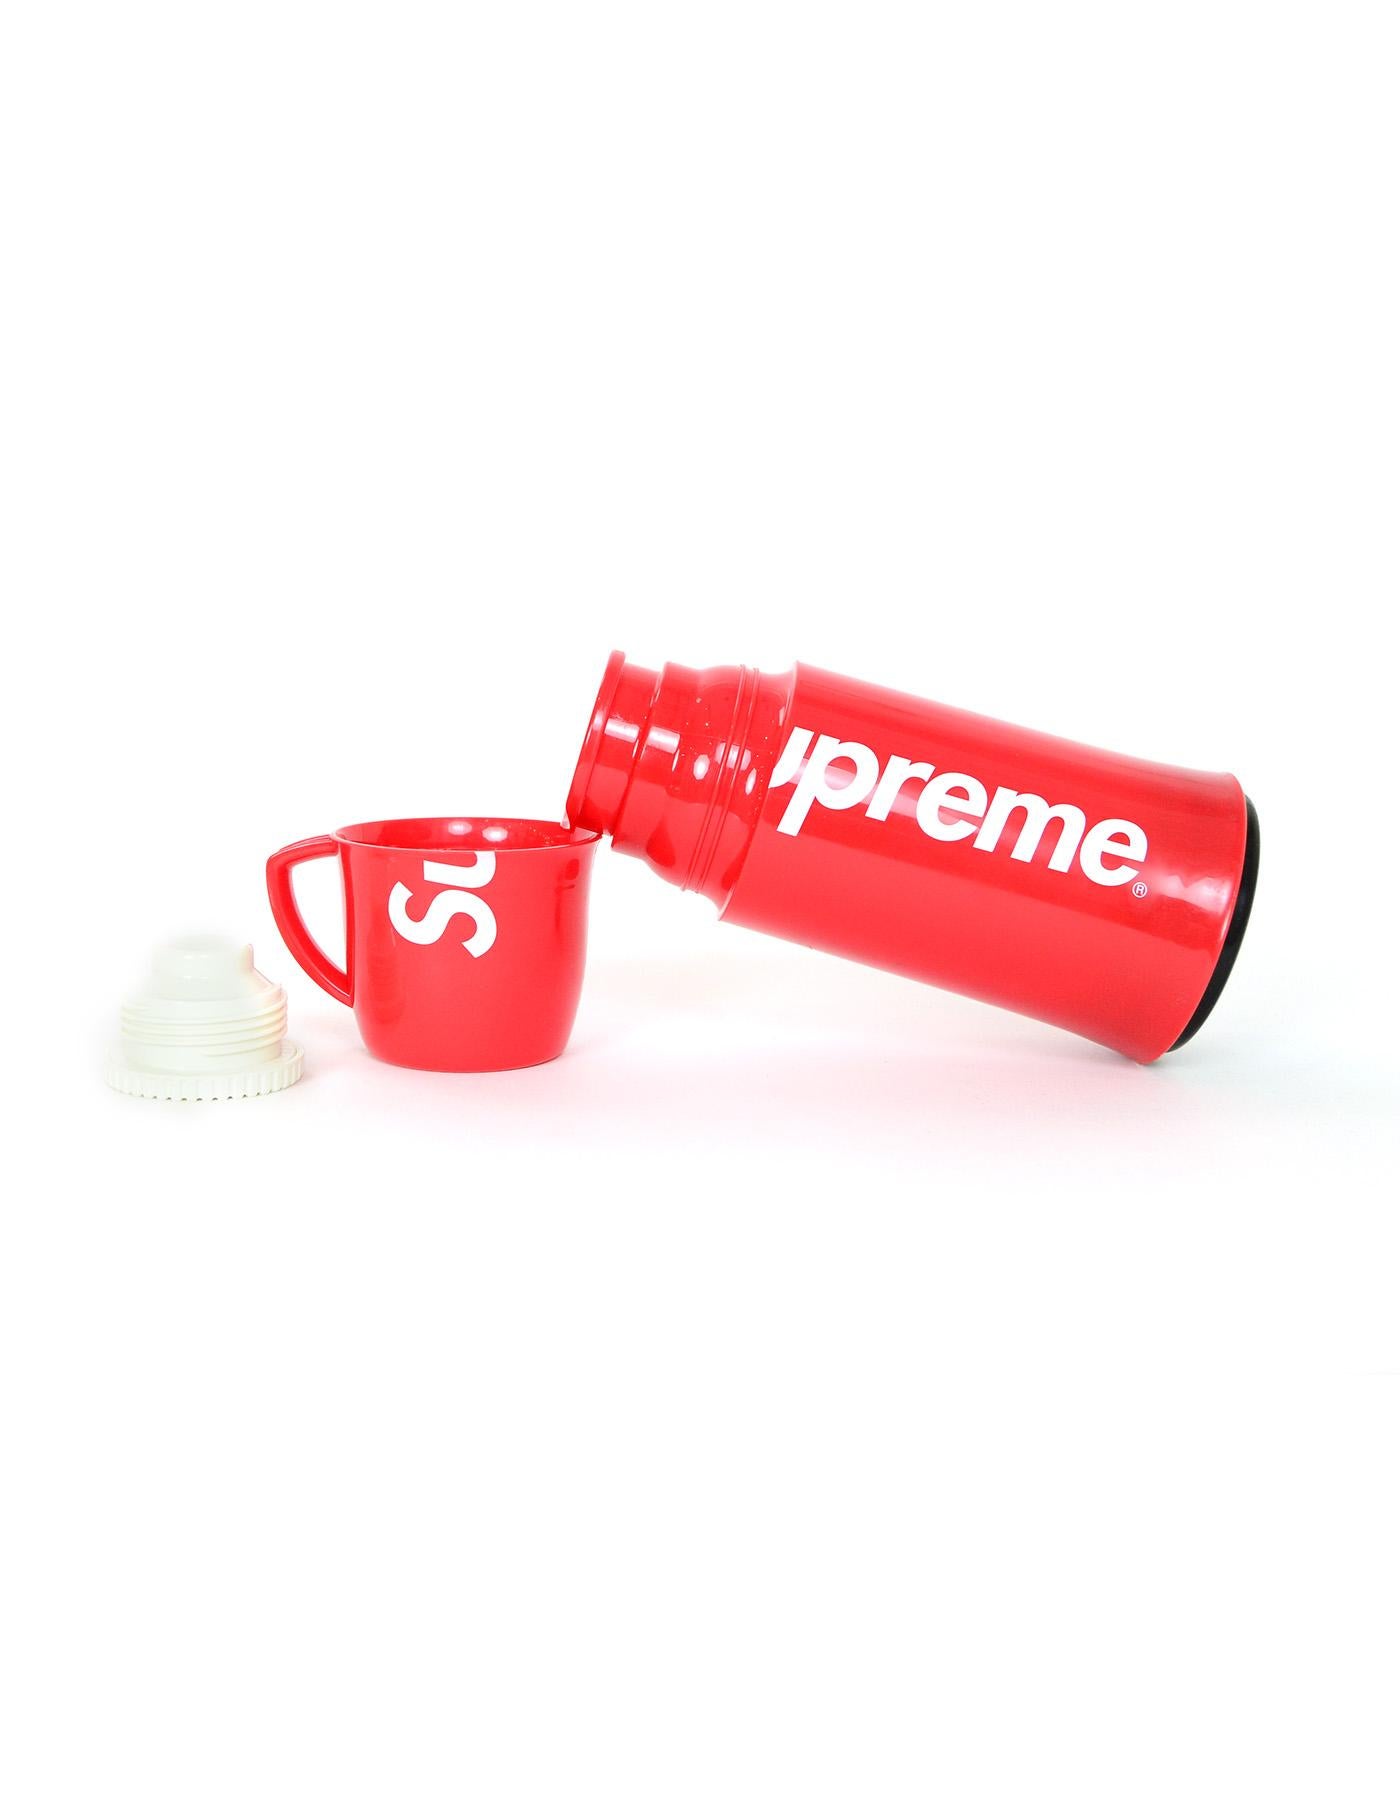 Supreme x Helios Red Thermos W/ White Logo 

Made In: Germany 
Color: Red and white
Materials: Plastic and metal
Closure/Opening: Twist top 
Overall Condition: Excellent pre-owned condition with exception of some scratches in the